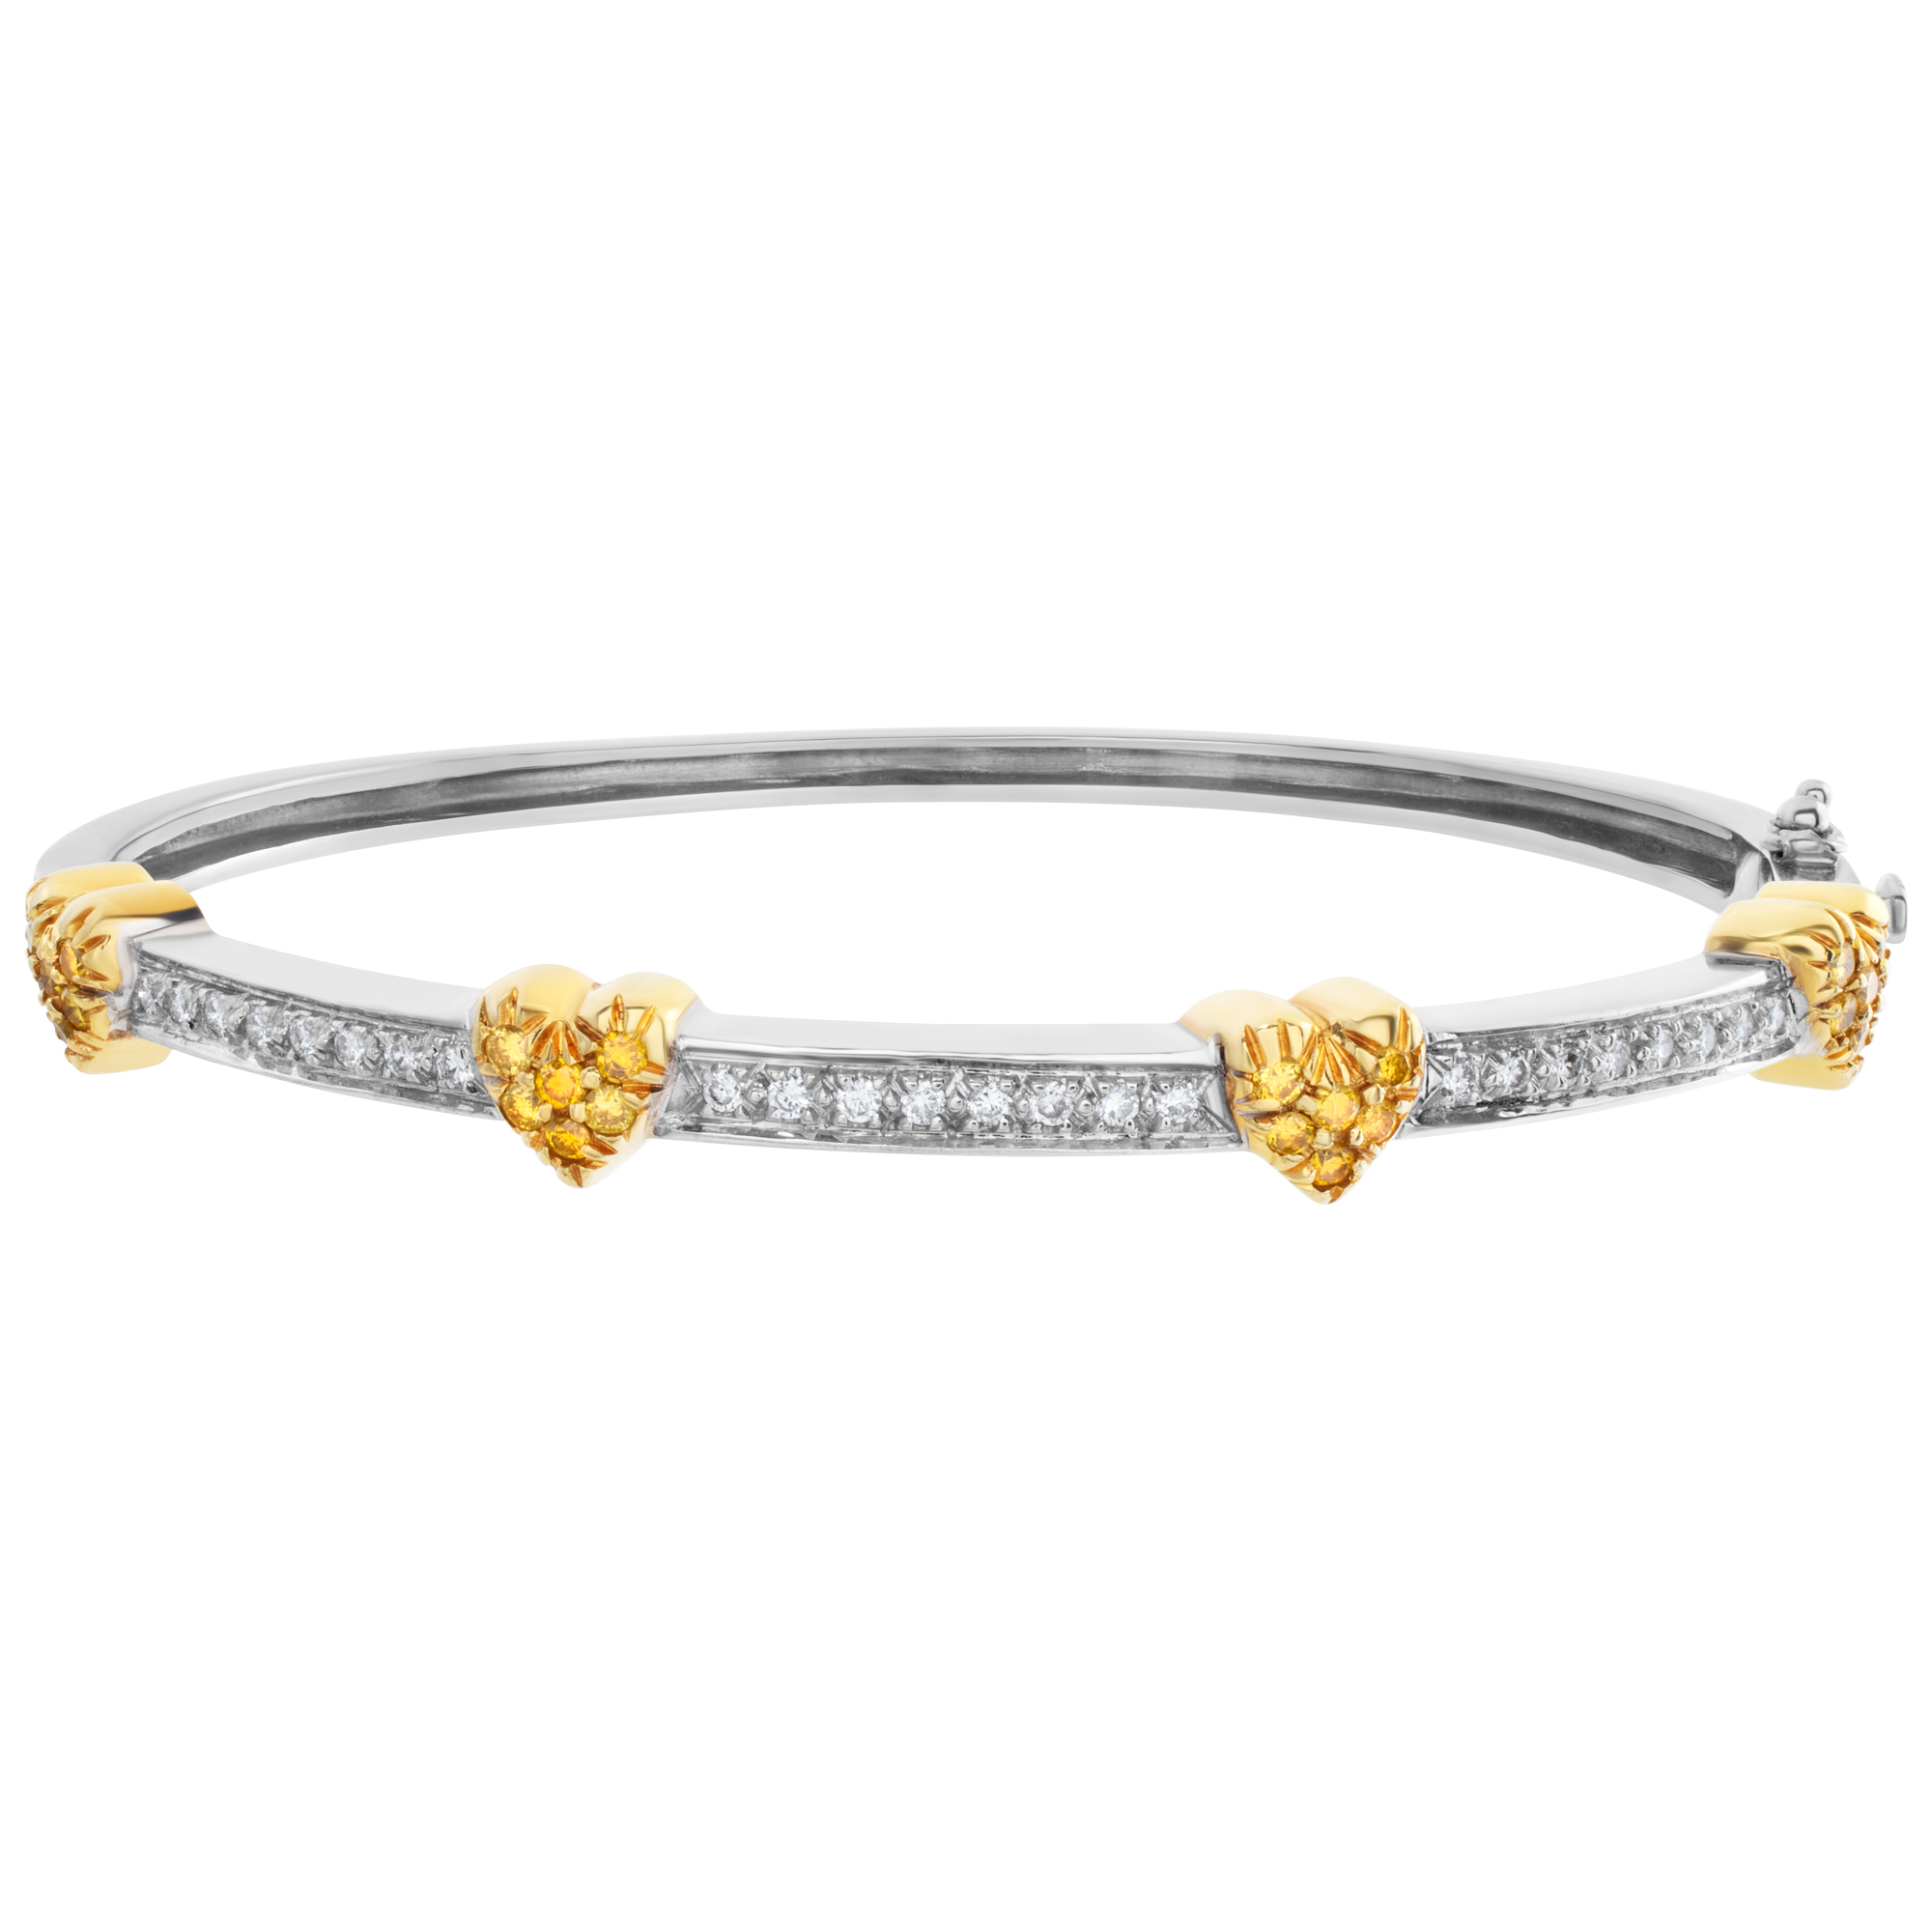 White and yellow diamond heart bangle in platinum and 18k yellow gold. Approximately 0.54 carats in white & yellow diamonds.